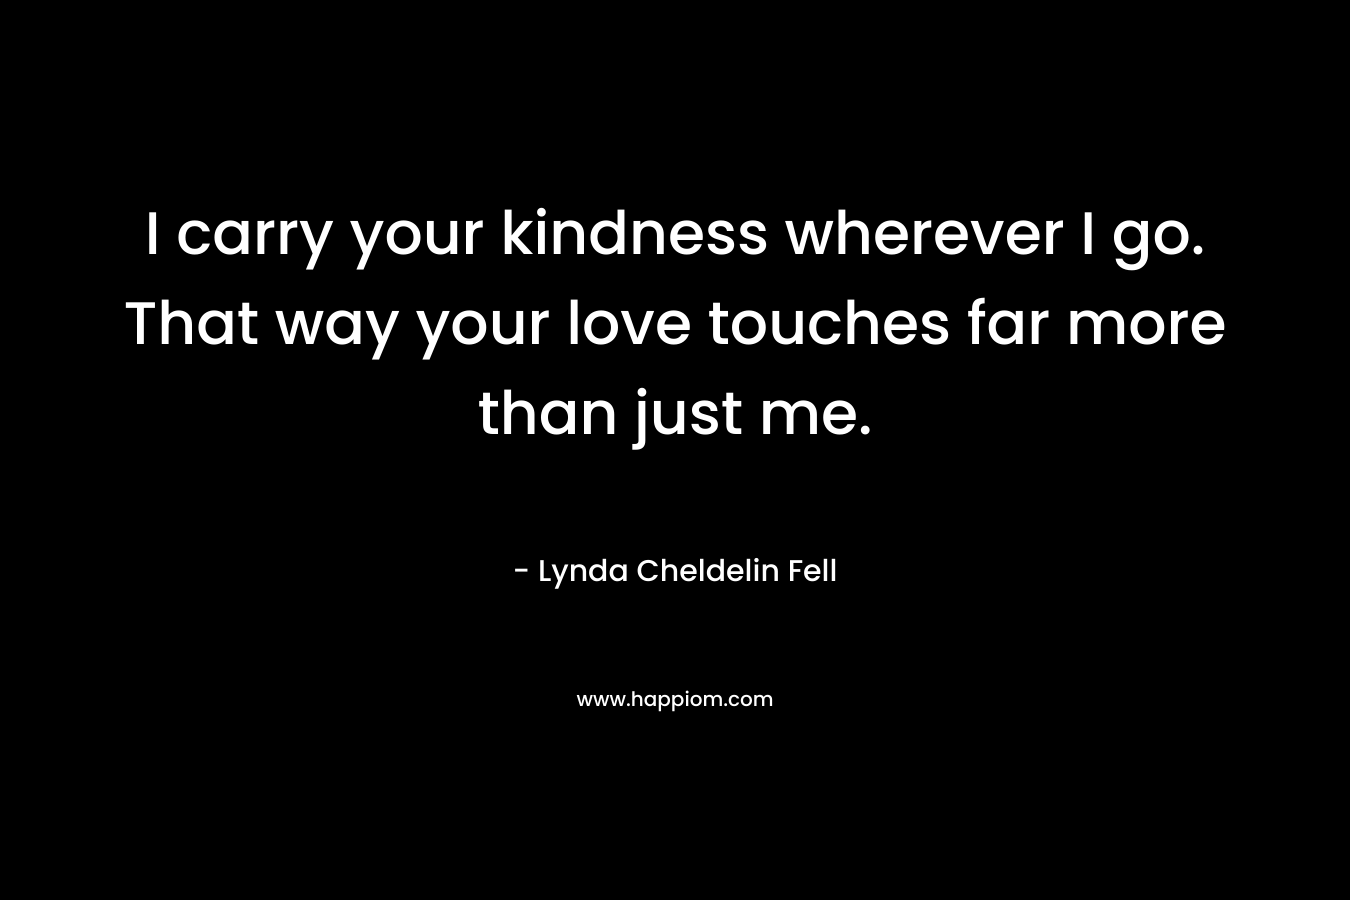 I carry your kindness wherever I go. That way your love touches far more than just me. – Lynda Cheldelin Fell